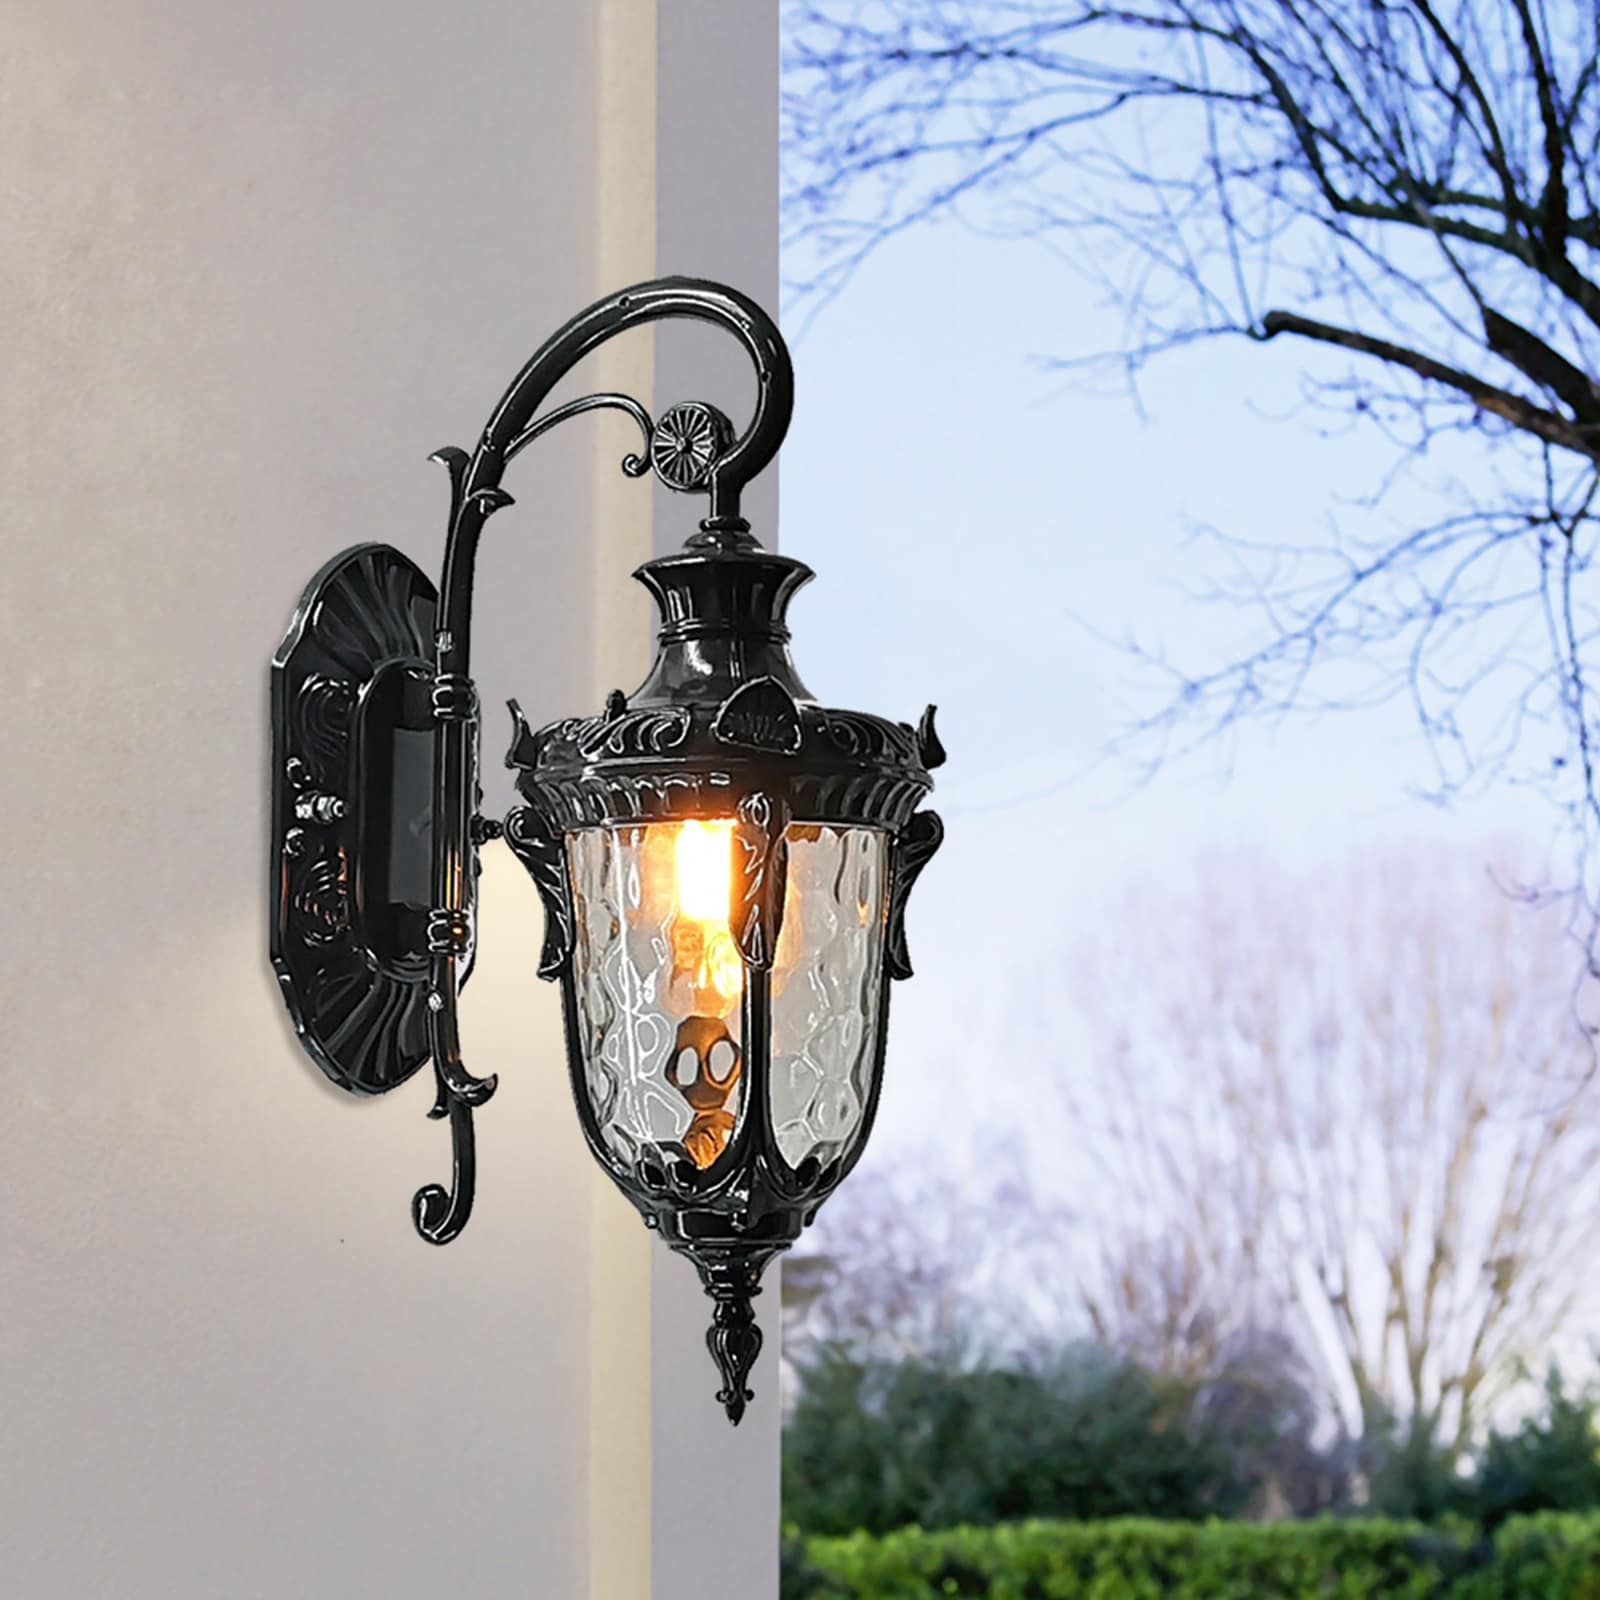 Waterproof and Antirust Outdoor Wall Lamp Glass Shade On Sale Bed Bath   Beyond 35996870